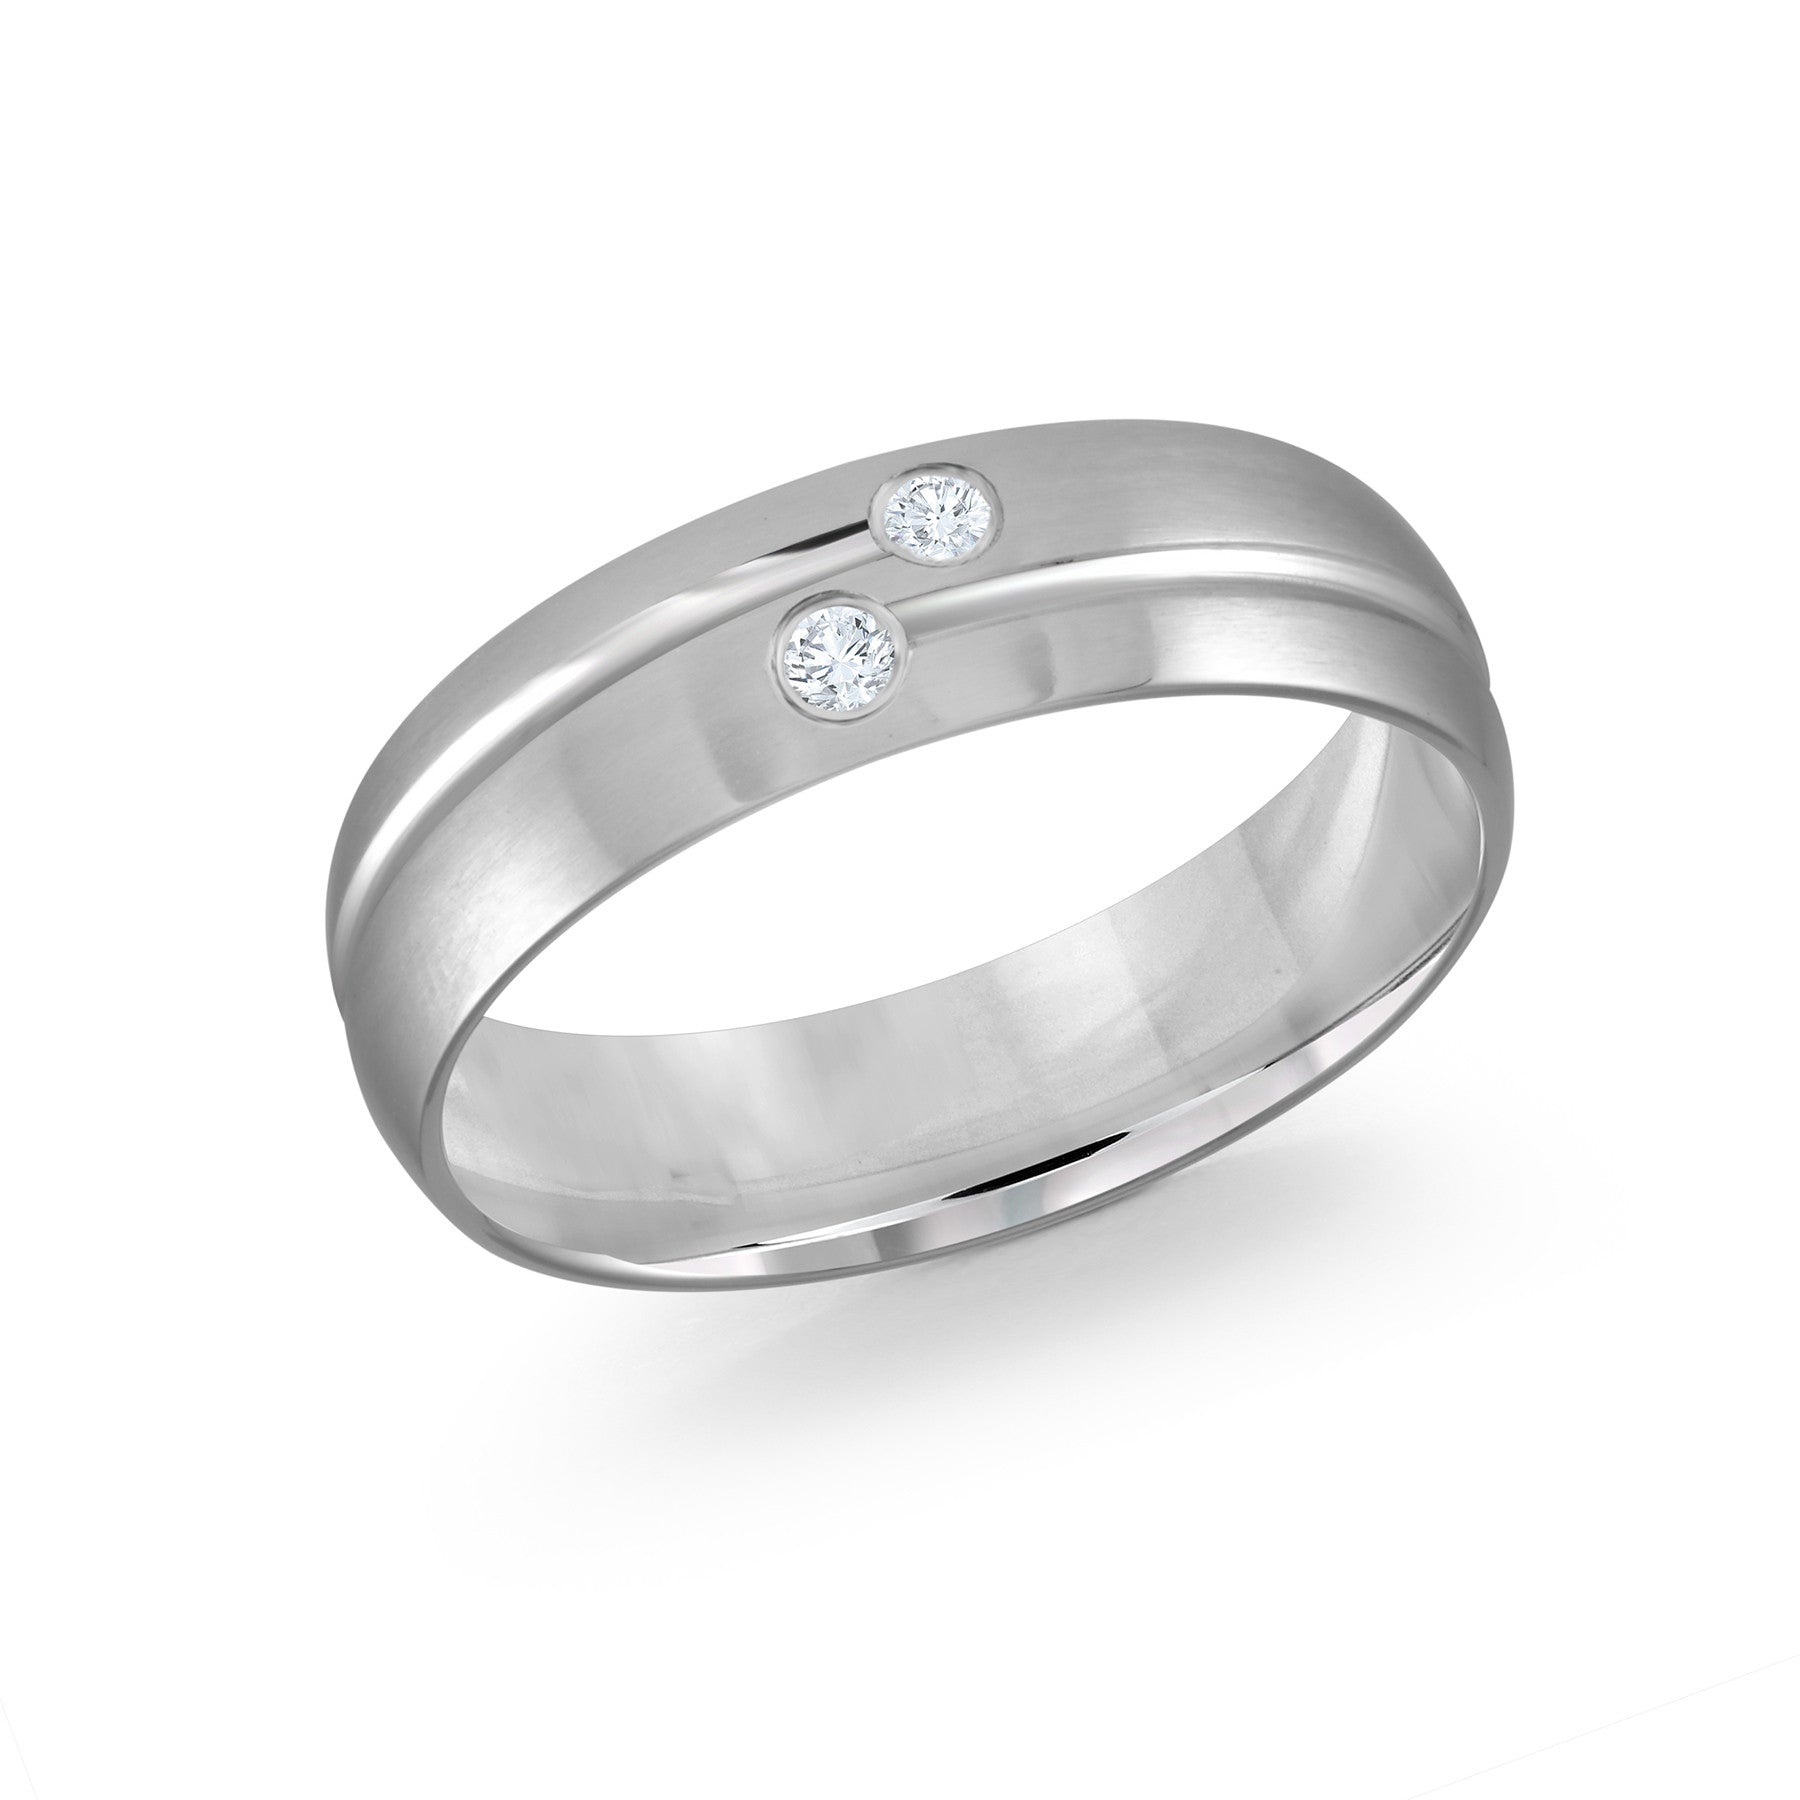 Mens Diamond White Gold Wedding Band with a Striped Design